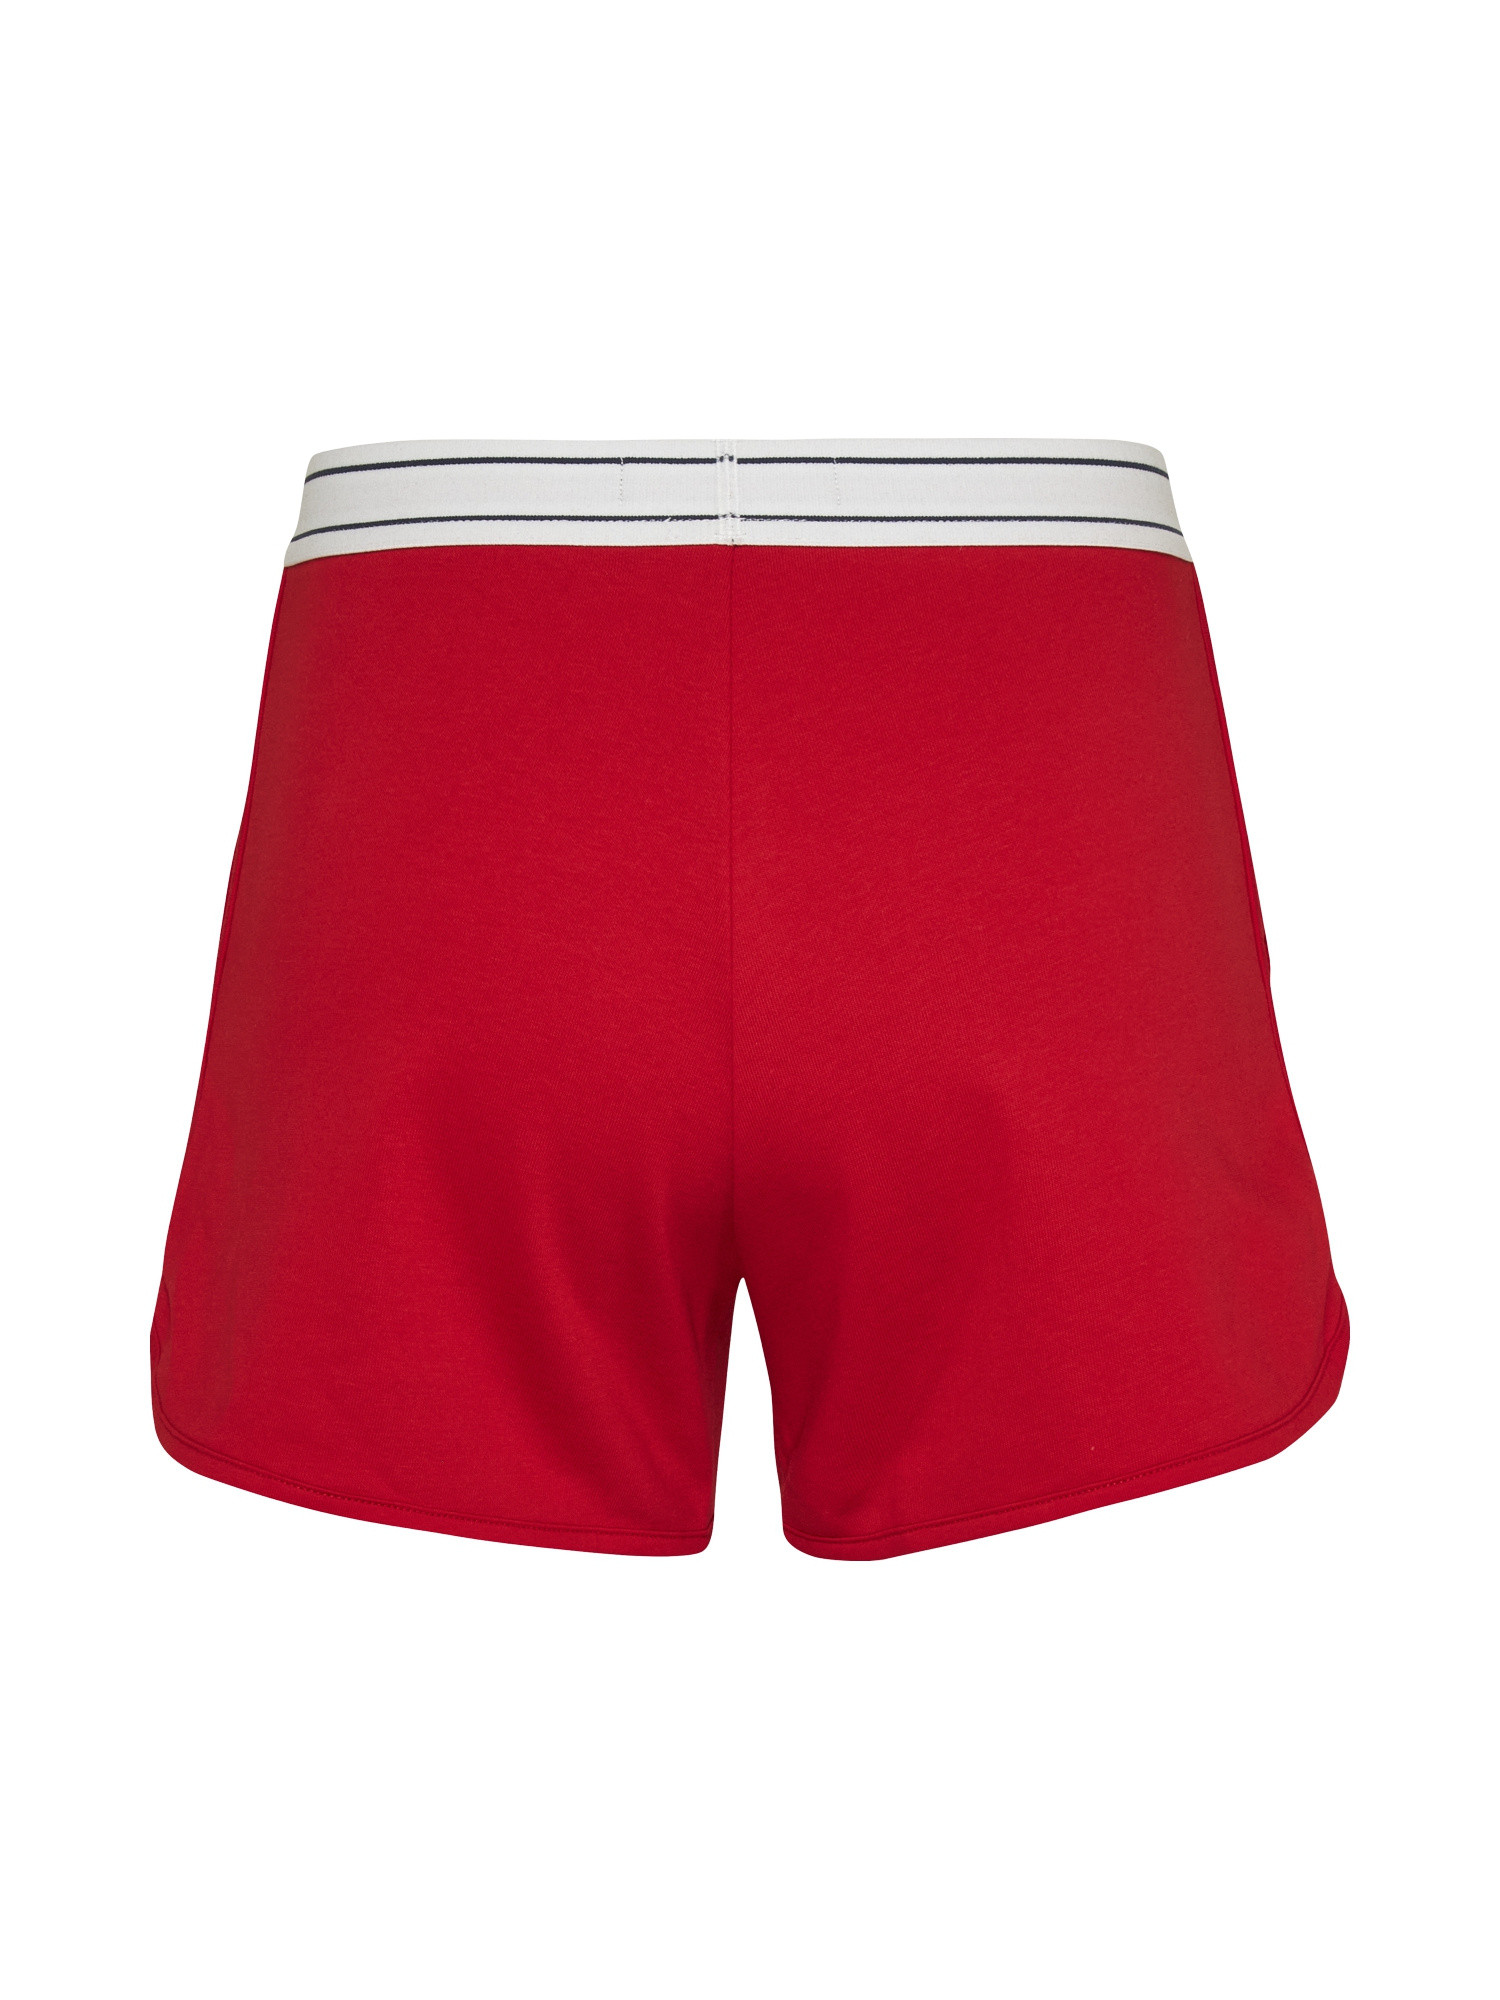 Tommy Jeans - Shorts sportivi con logo, Rosso, large image number 1